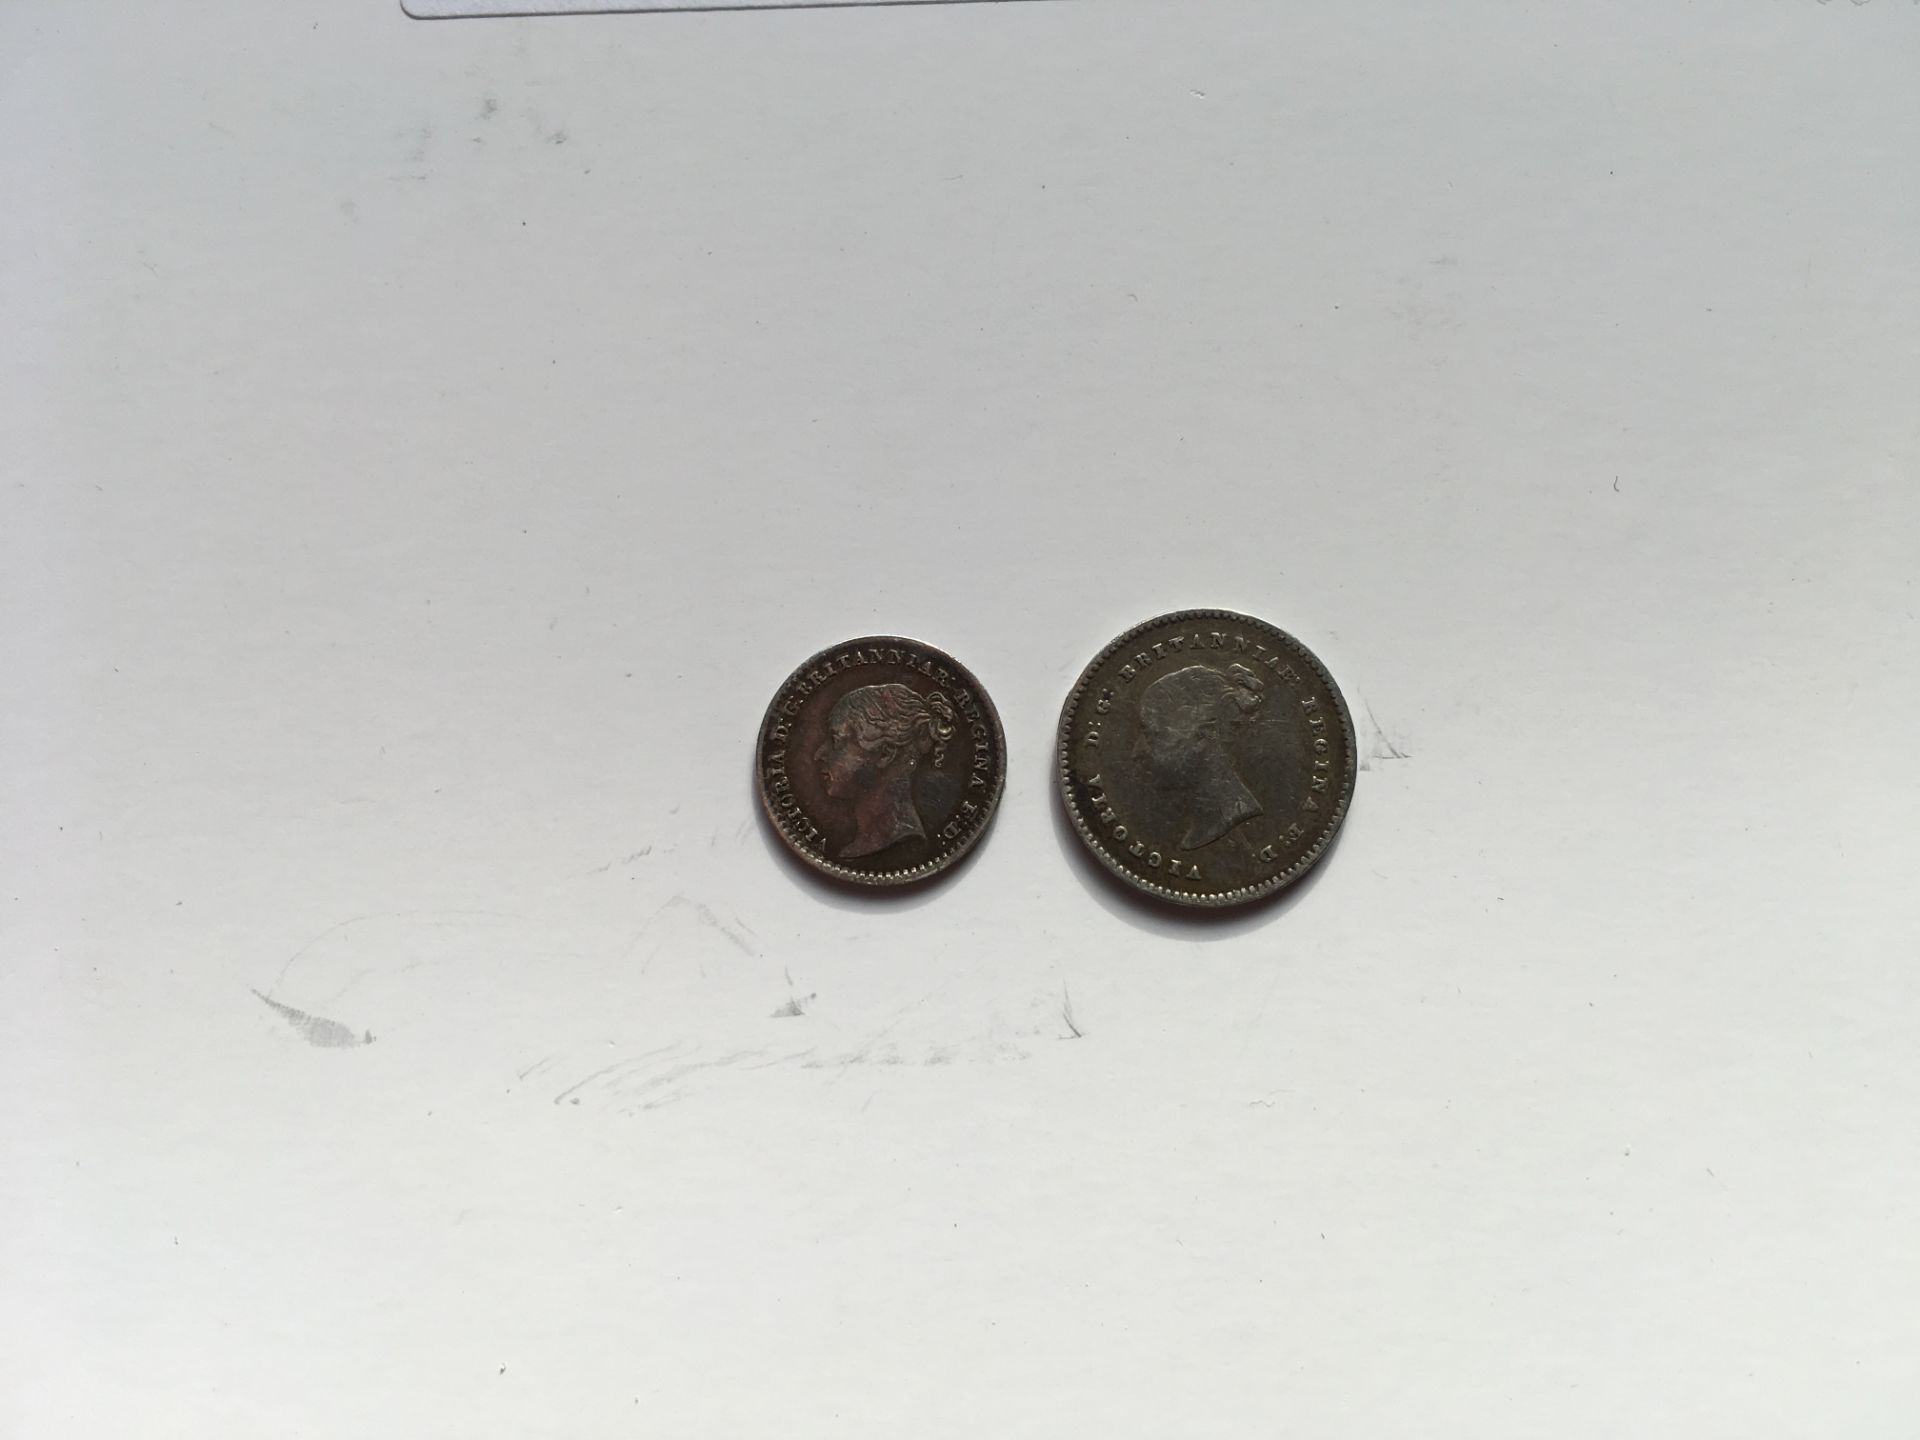 COINS: GB MAUNDY PENNY 1870 AND TWO PENCE 1838. - Image 7 of 8